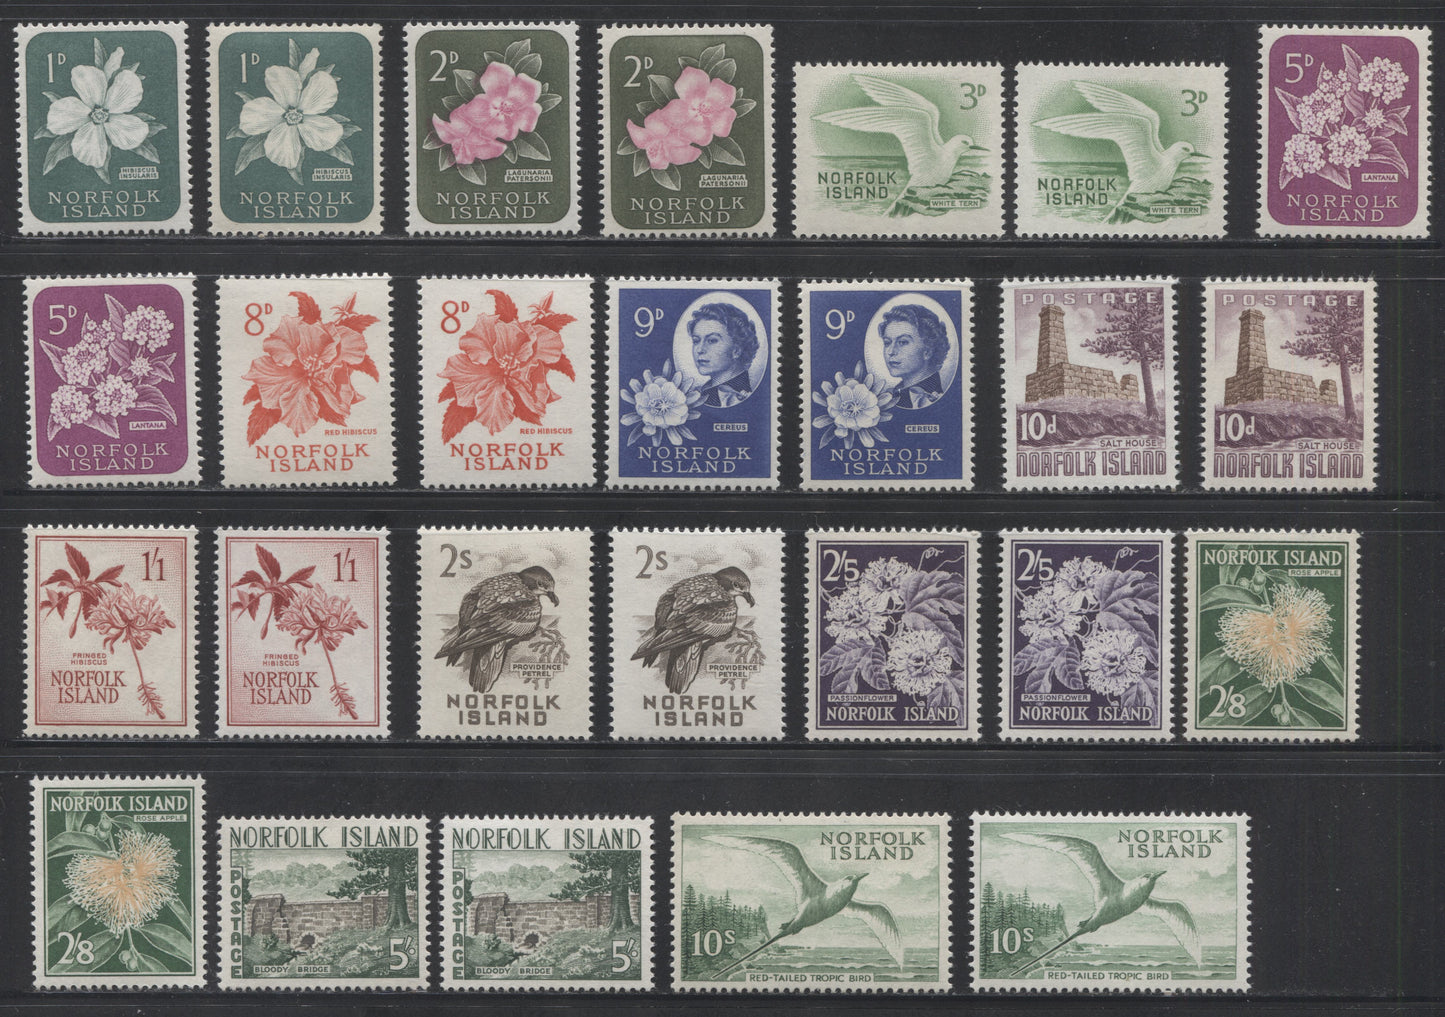 Lot 460 Norfolk Island #29-41, 1960-1962 1d - 10/- 1960-1962 Pictorial Definitive Issue, a VFNH Complete Set With Additional Paper and Shade Varieties